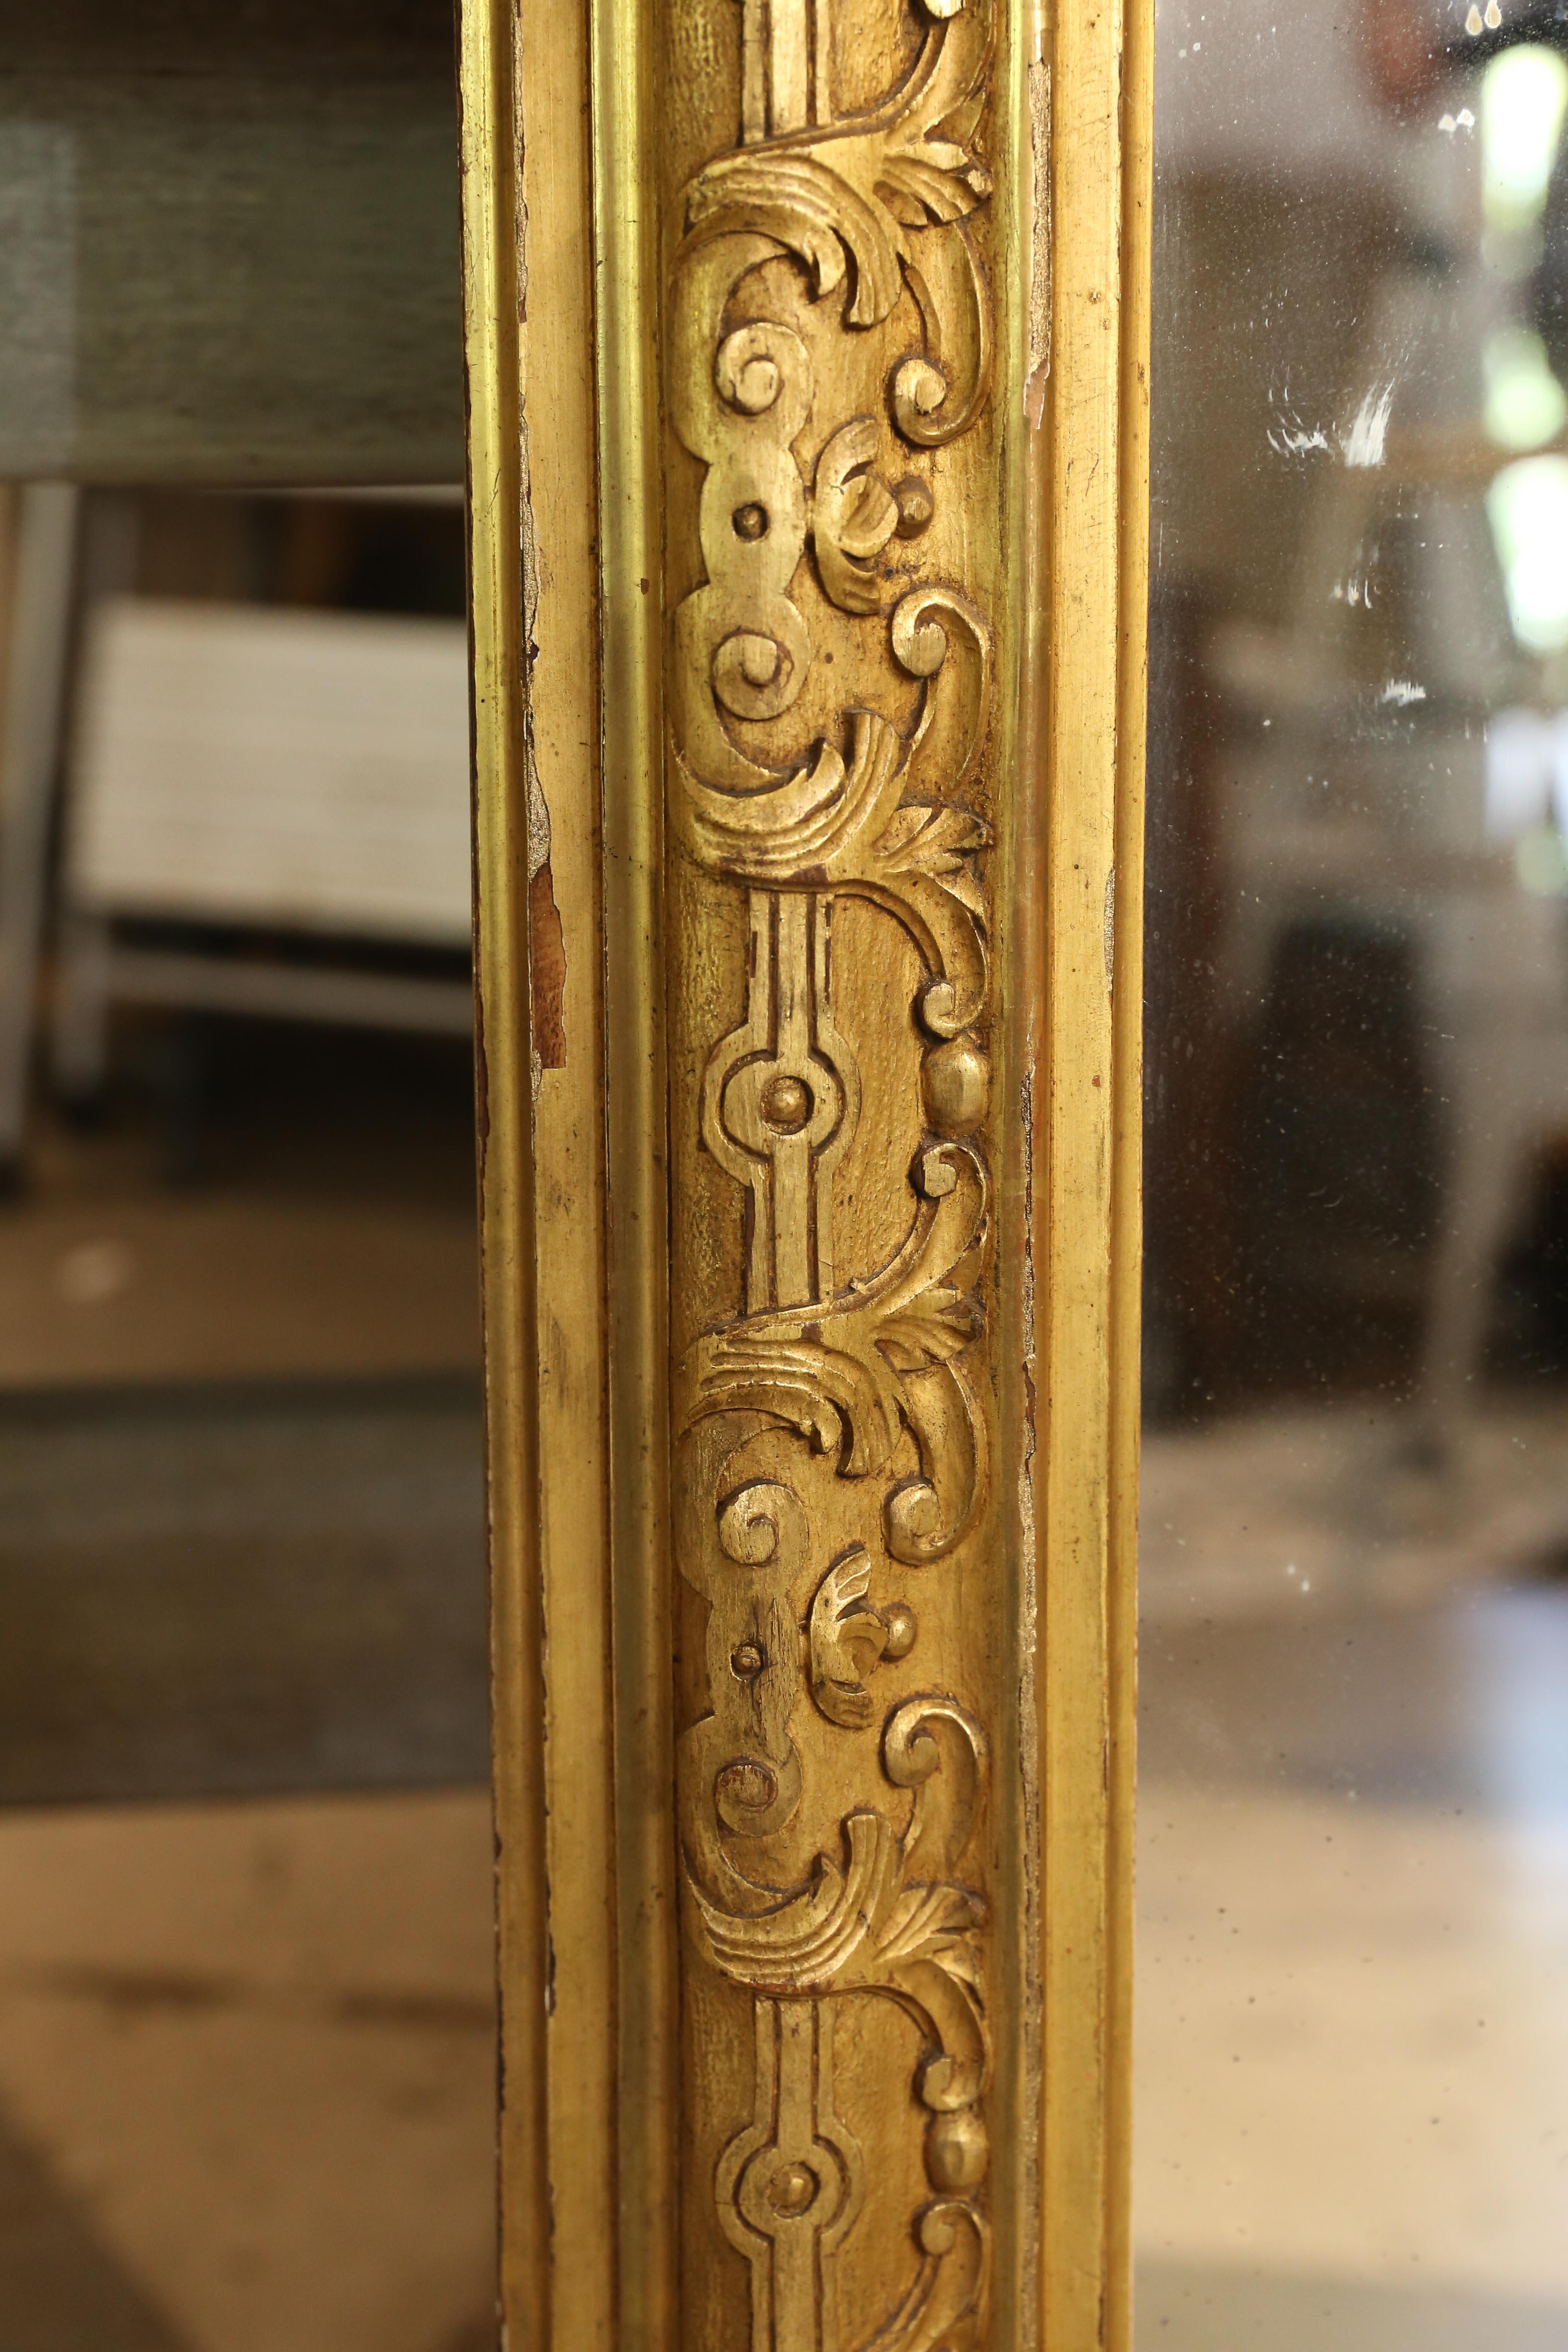 French Antique Gilt Carved Wall Mirror with Scroll Details, circa 1870